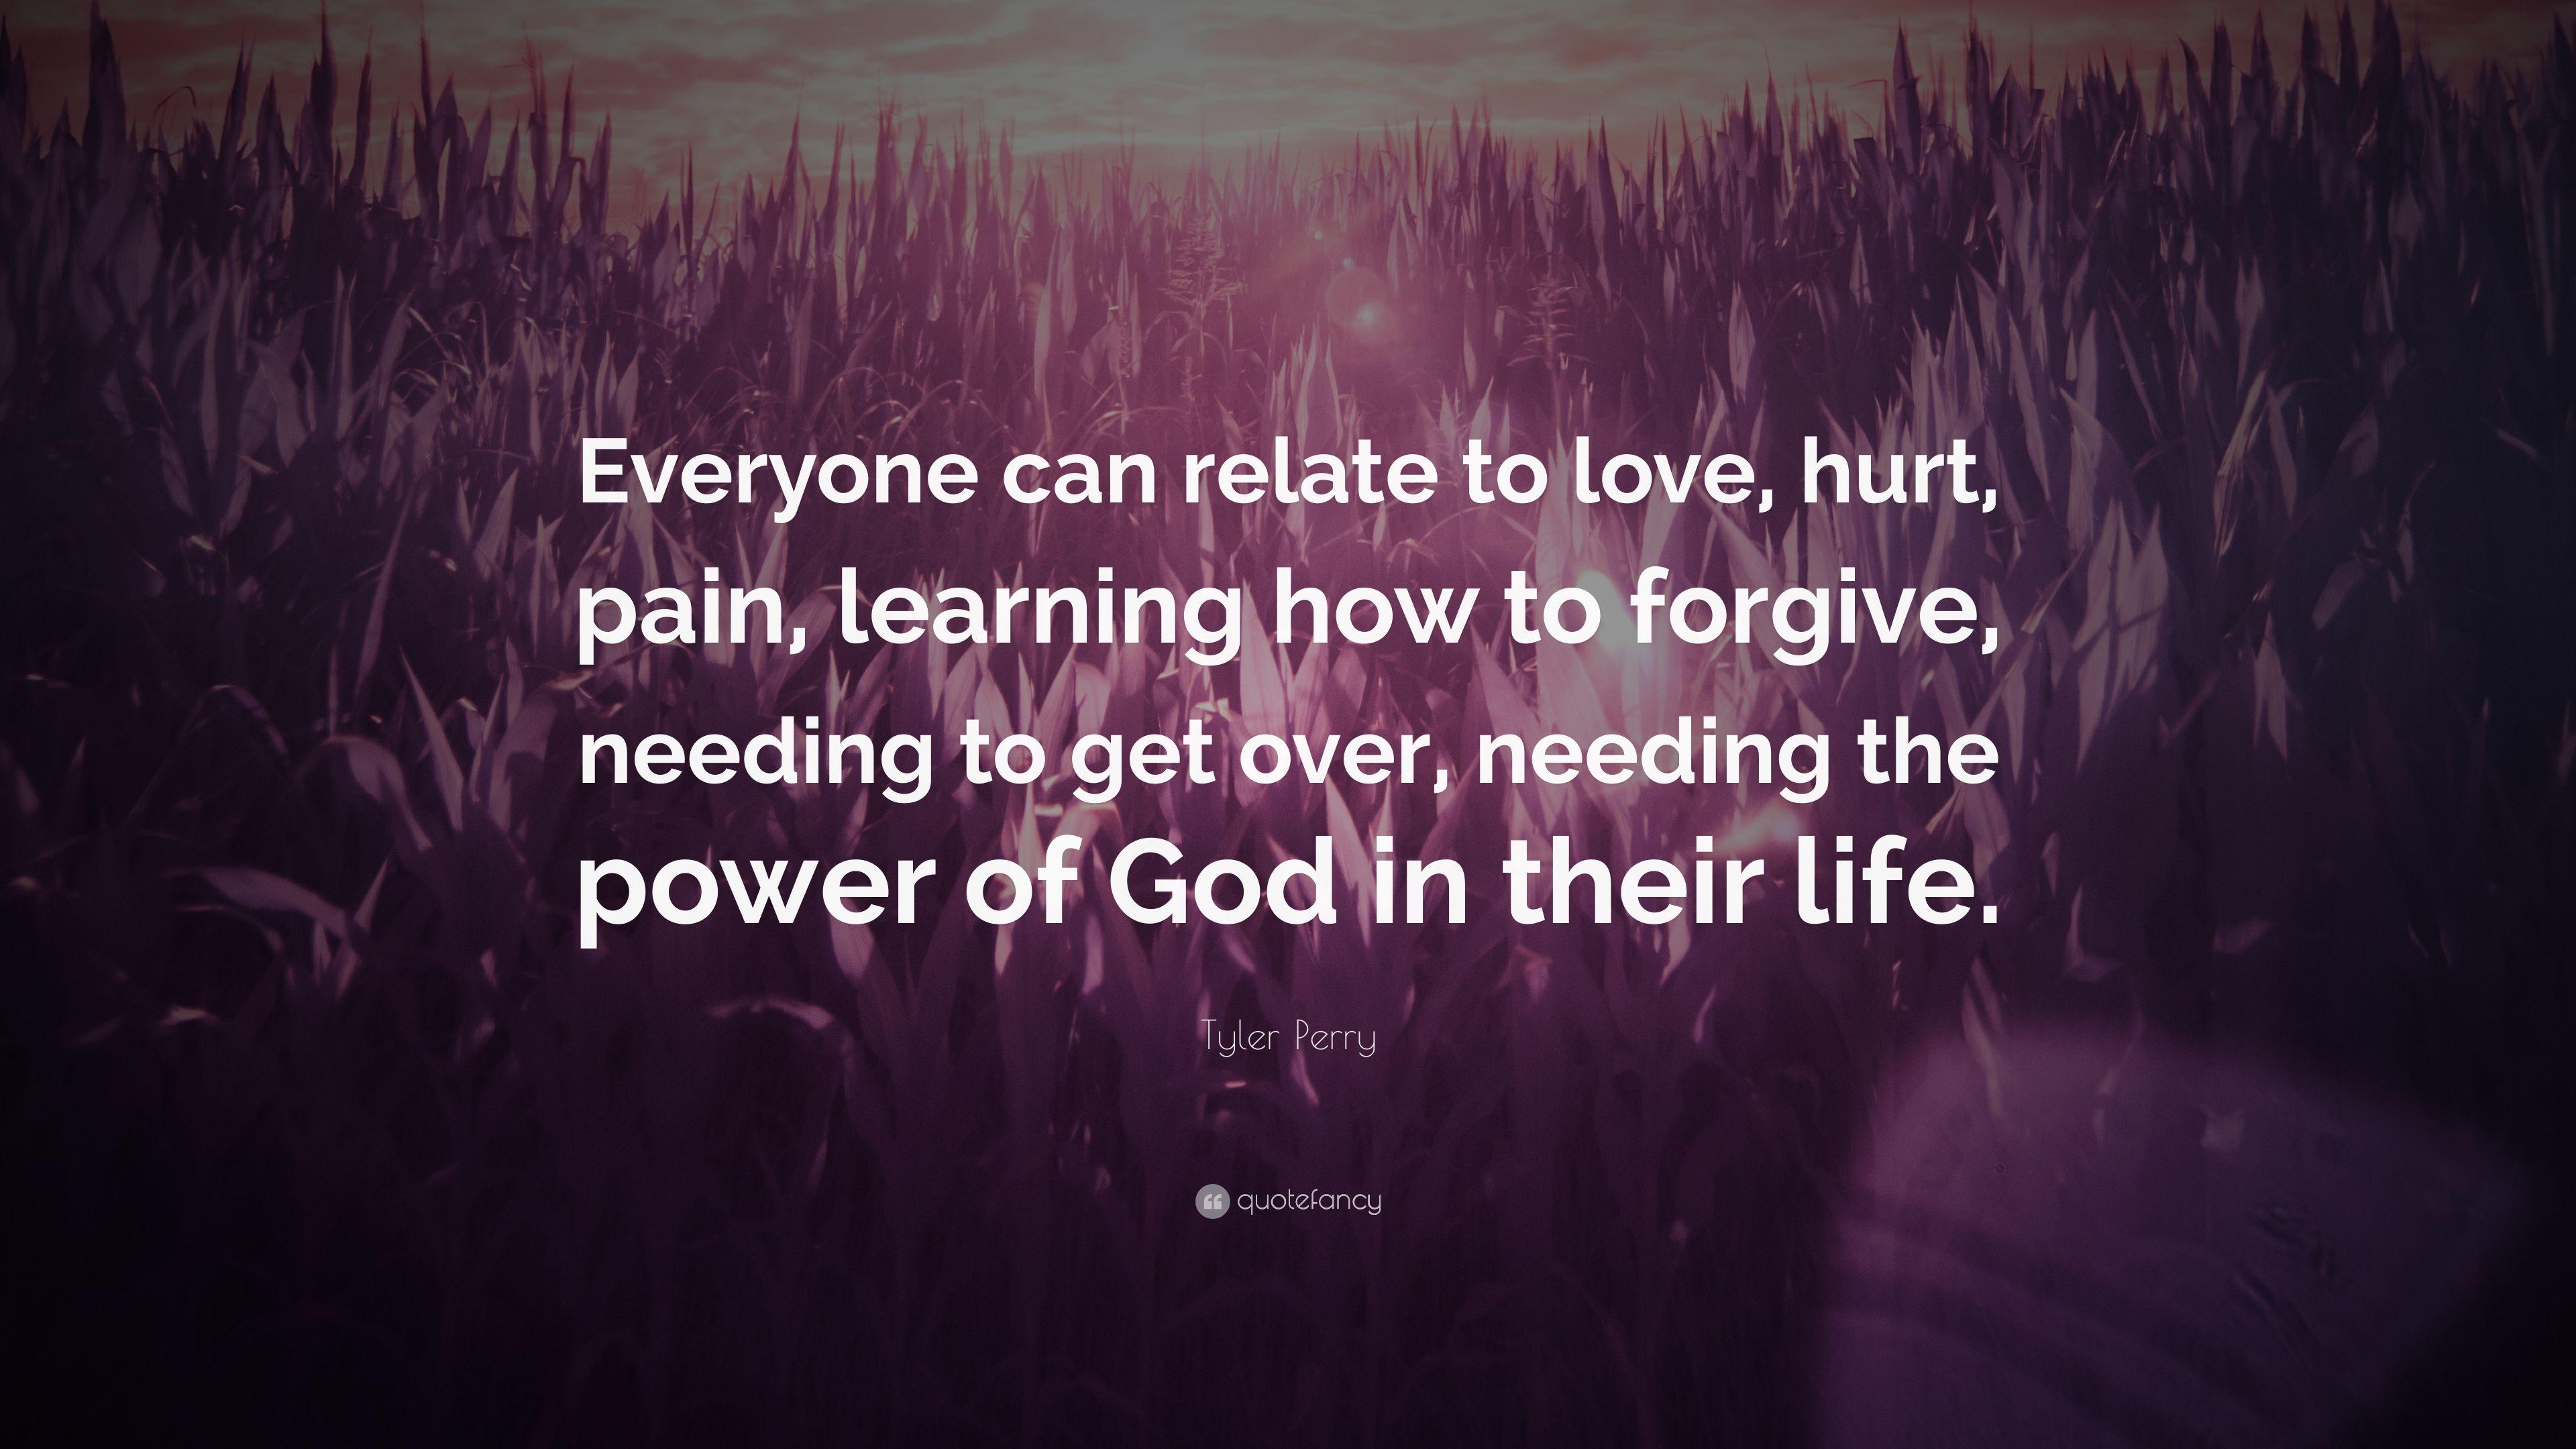 Tyler Perry Quote: “Everyone can relate to love, hurt, pain